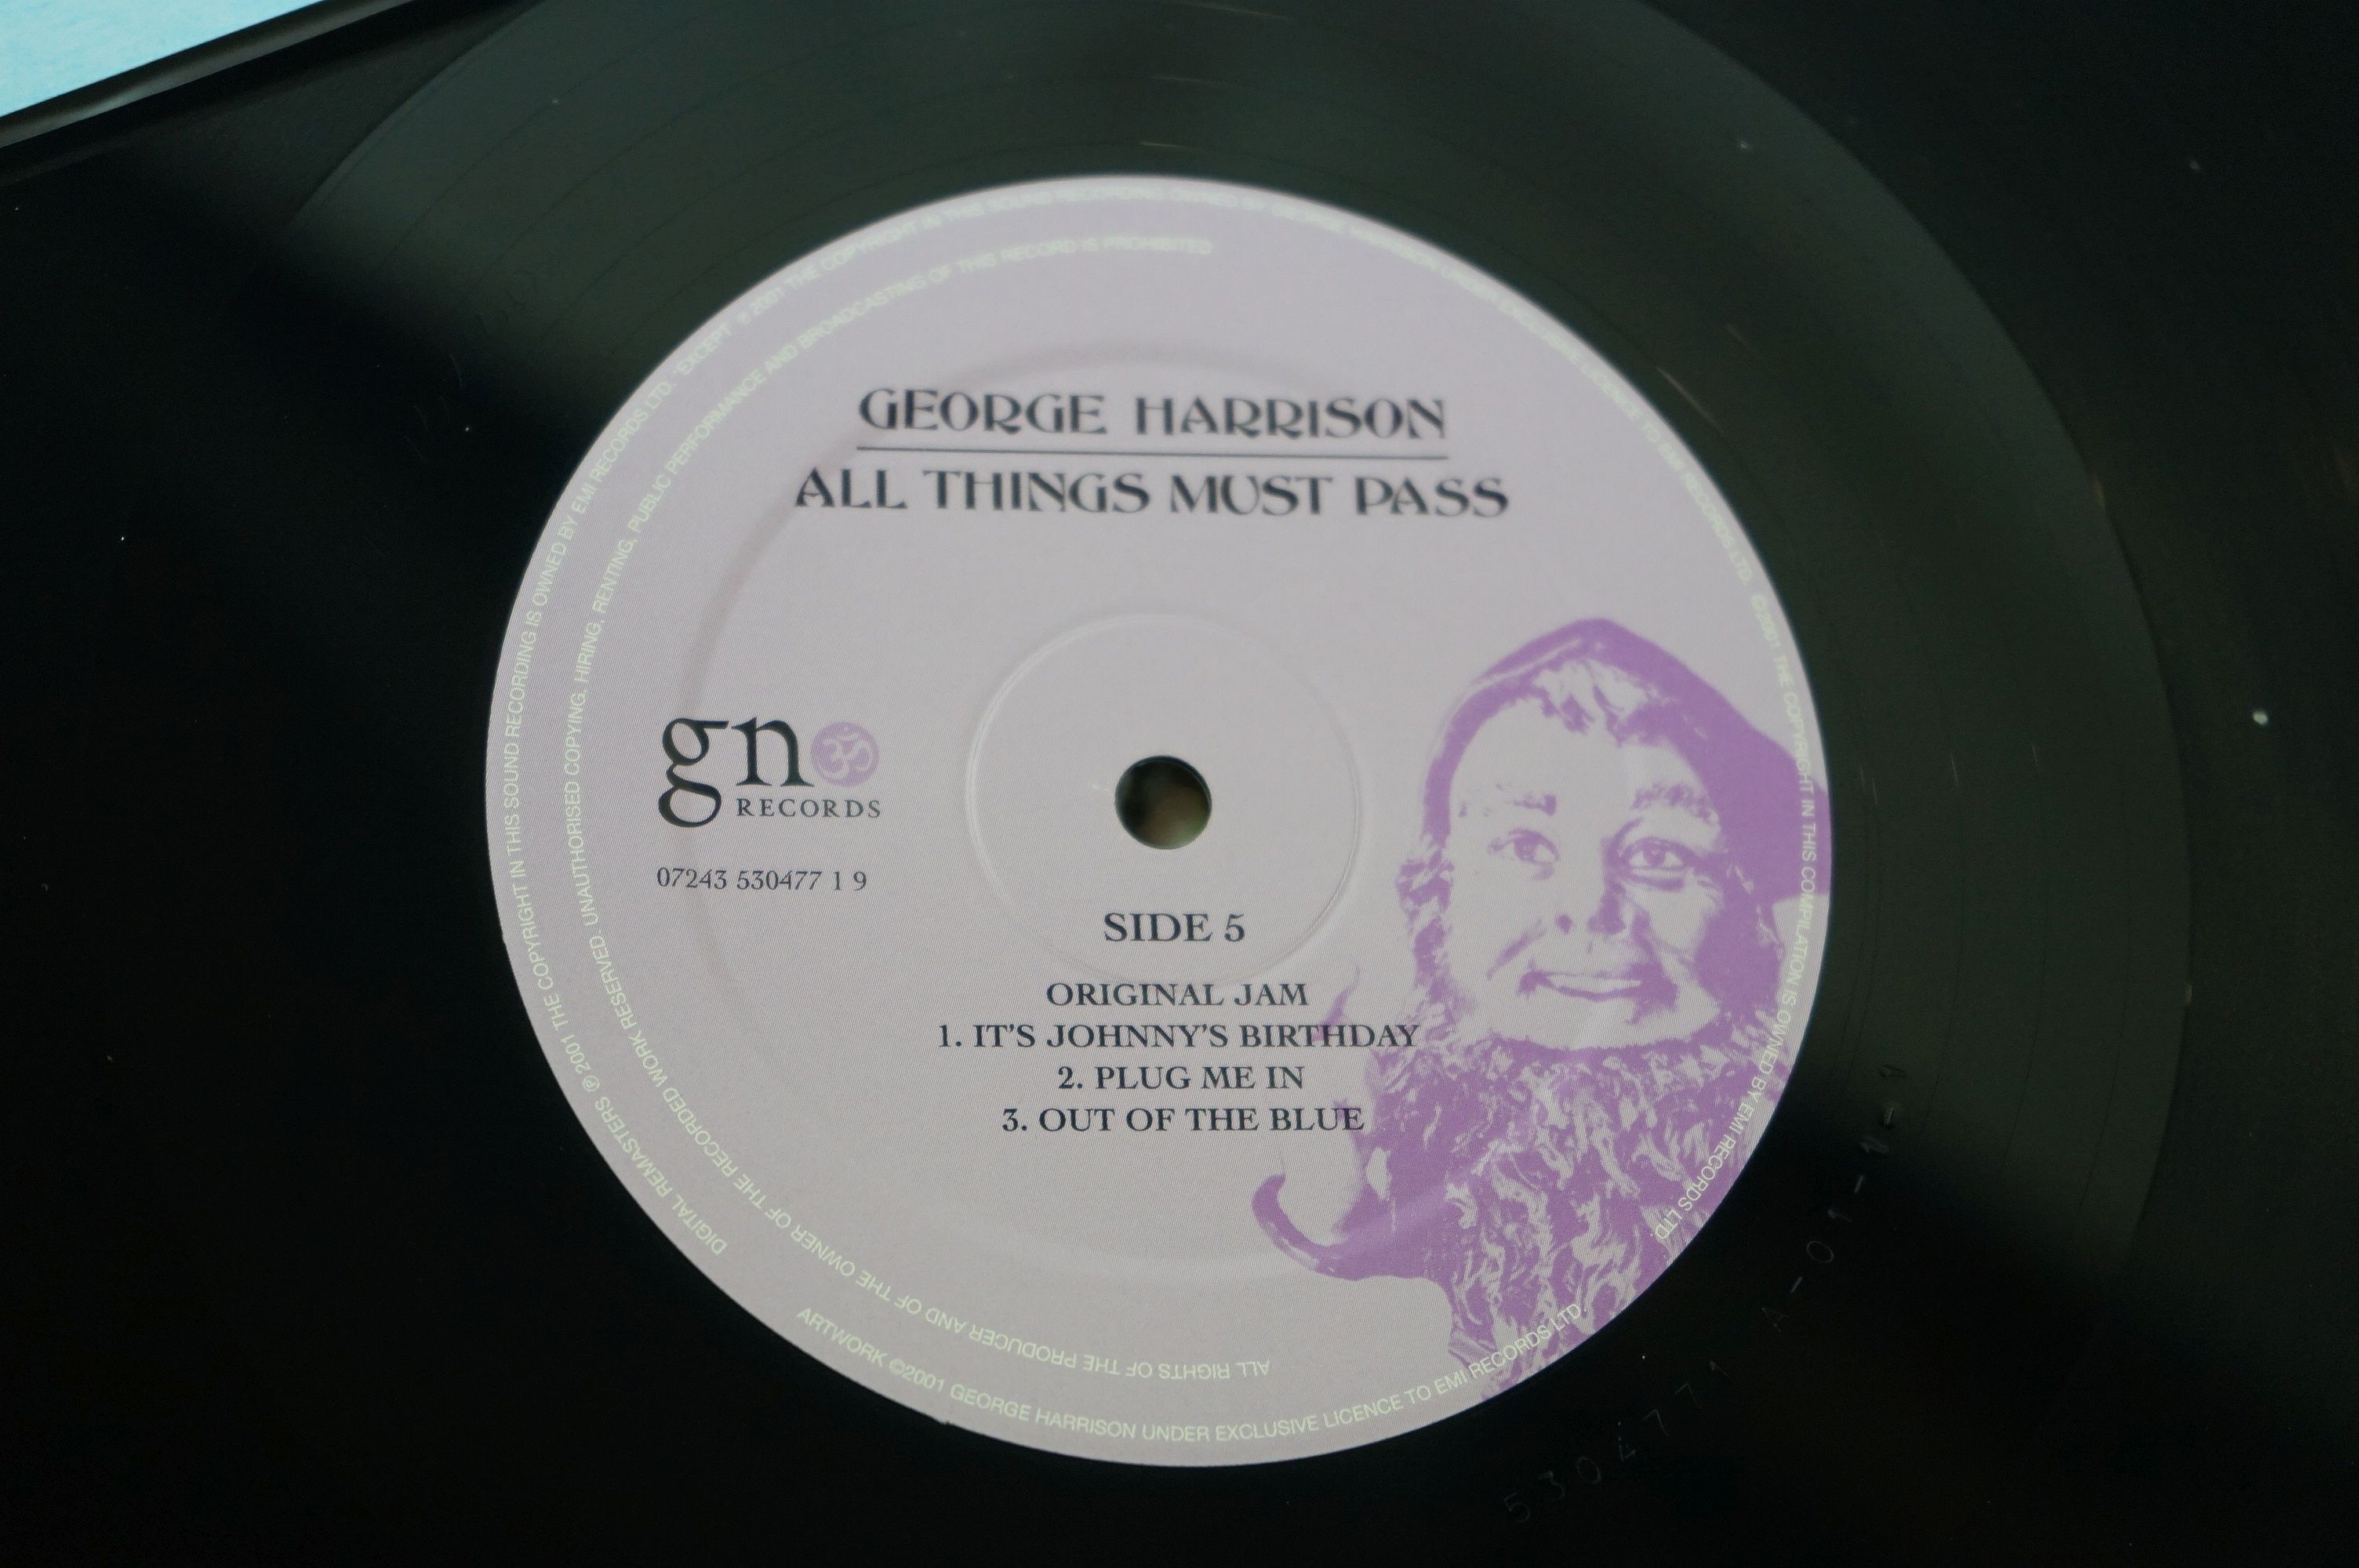 Vinyl - George Harrison All Things Must Pass (GnOM Records 7243 5 3047412) 3 LP box set (2001 - Image 6 of 8